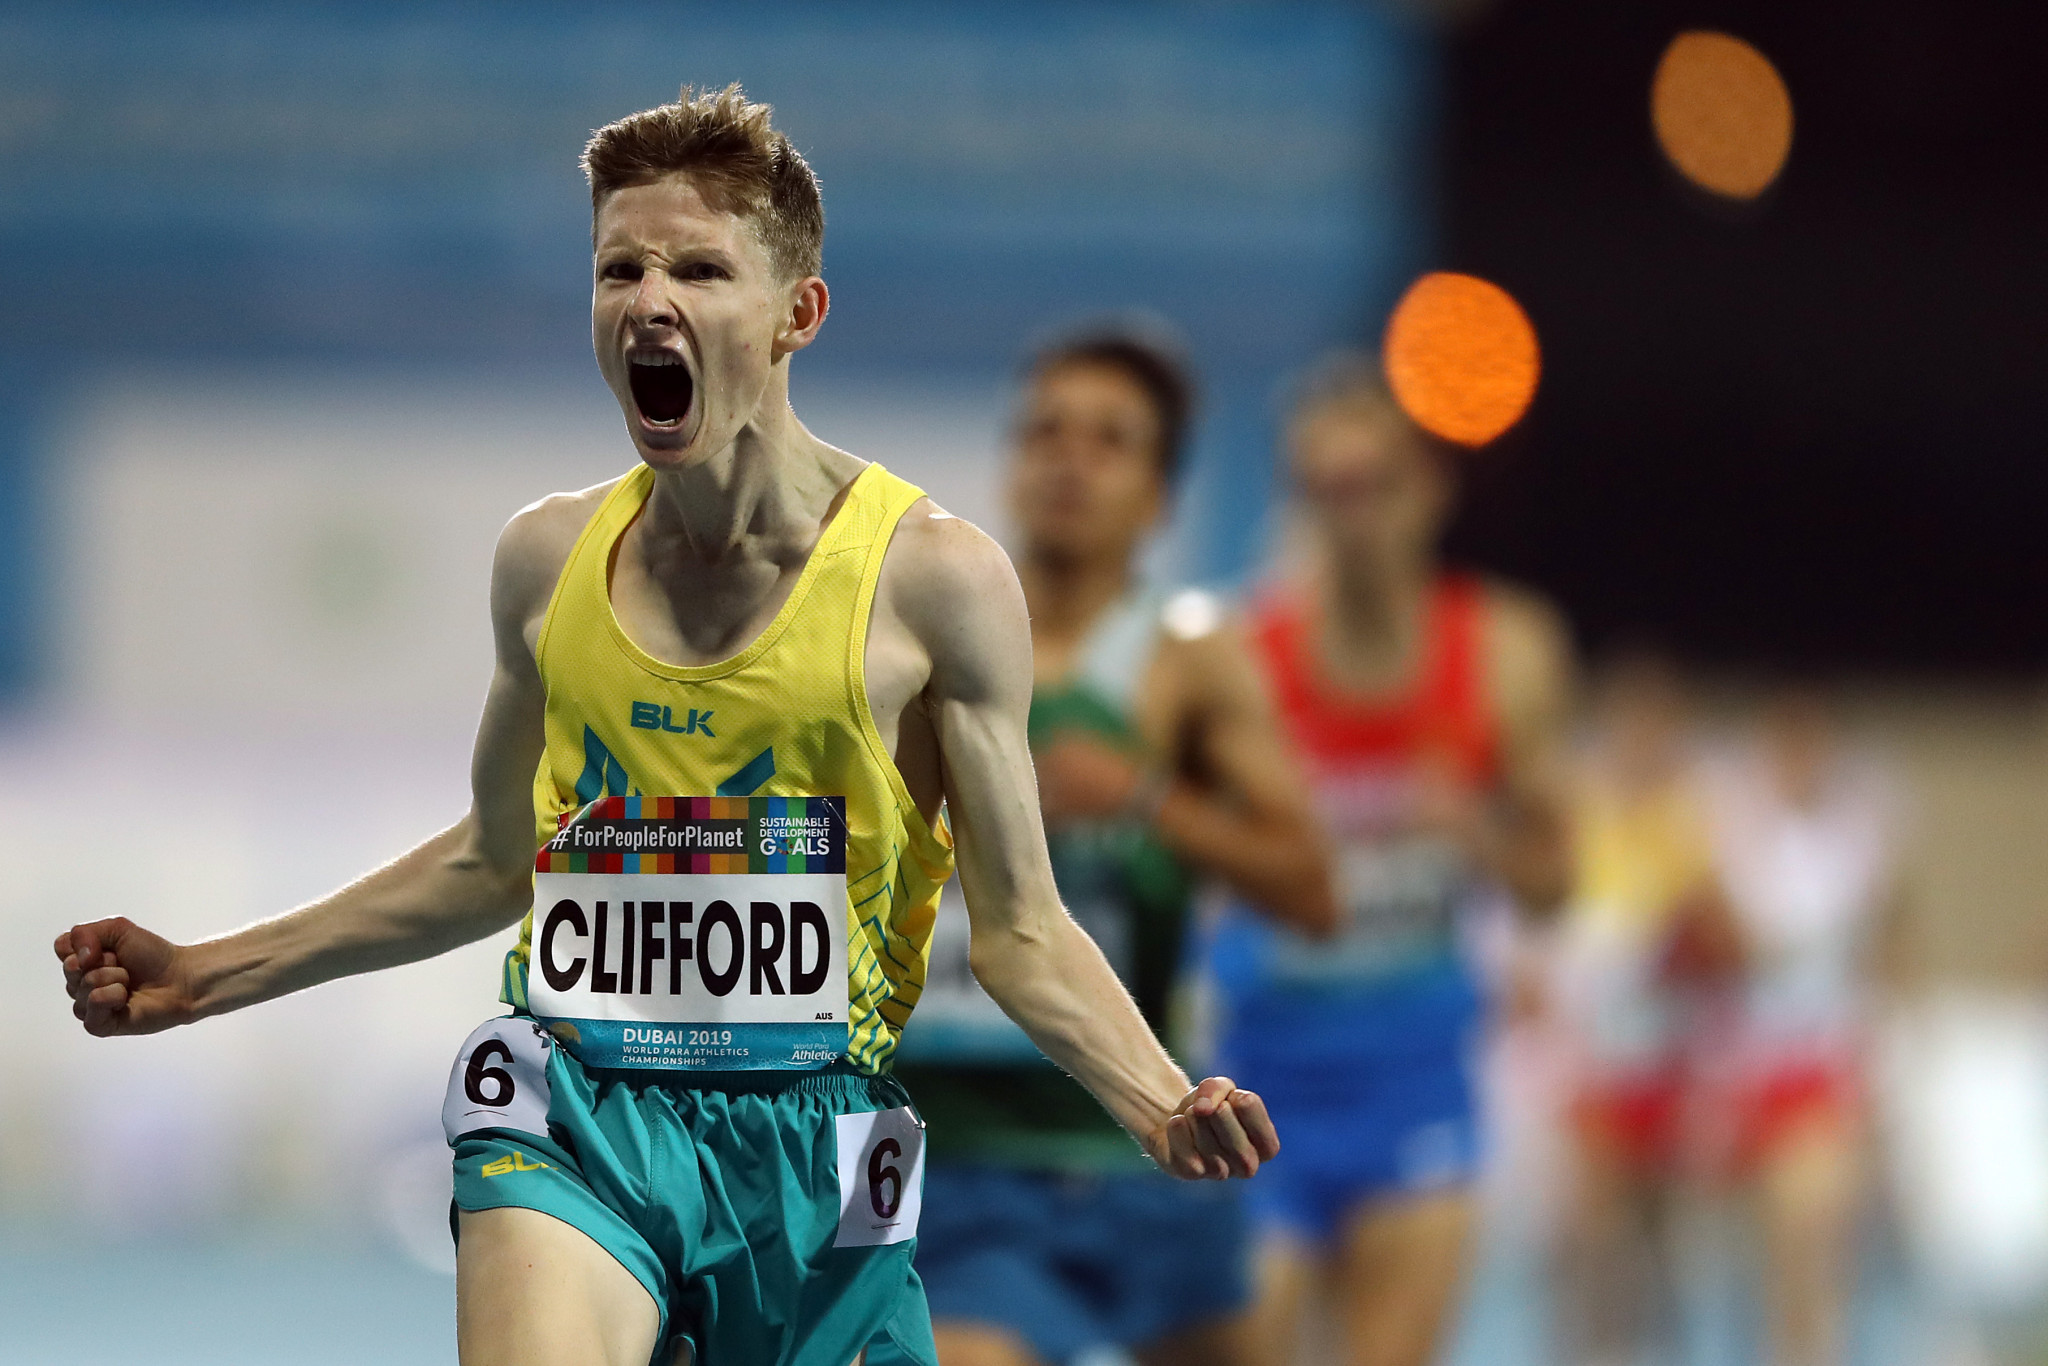 Jaryd Clifford won the men's 1500 metre T13 at the World Para Athletics Championships ©Getty Images